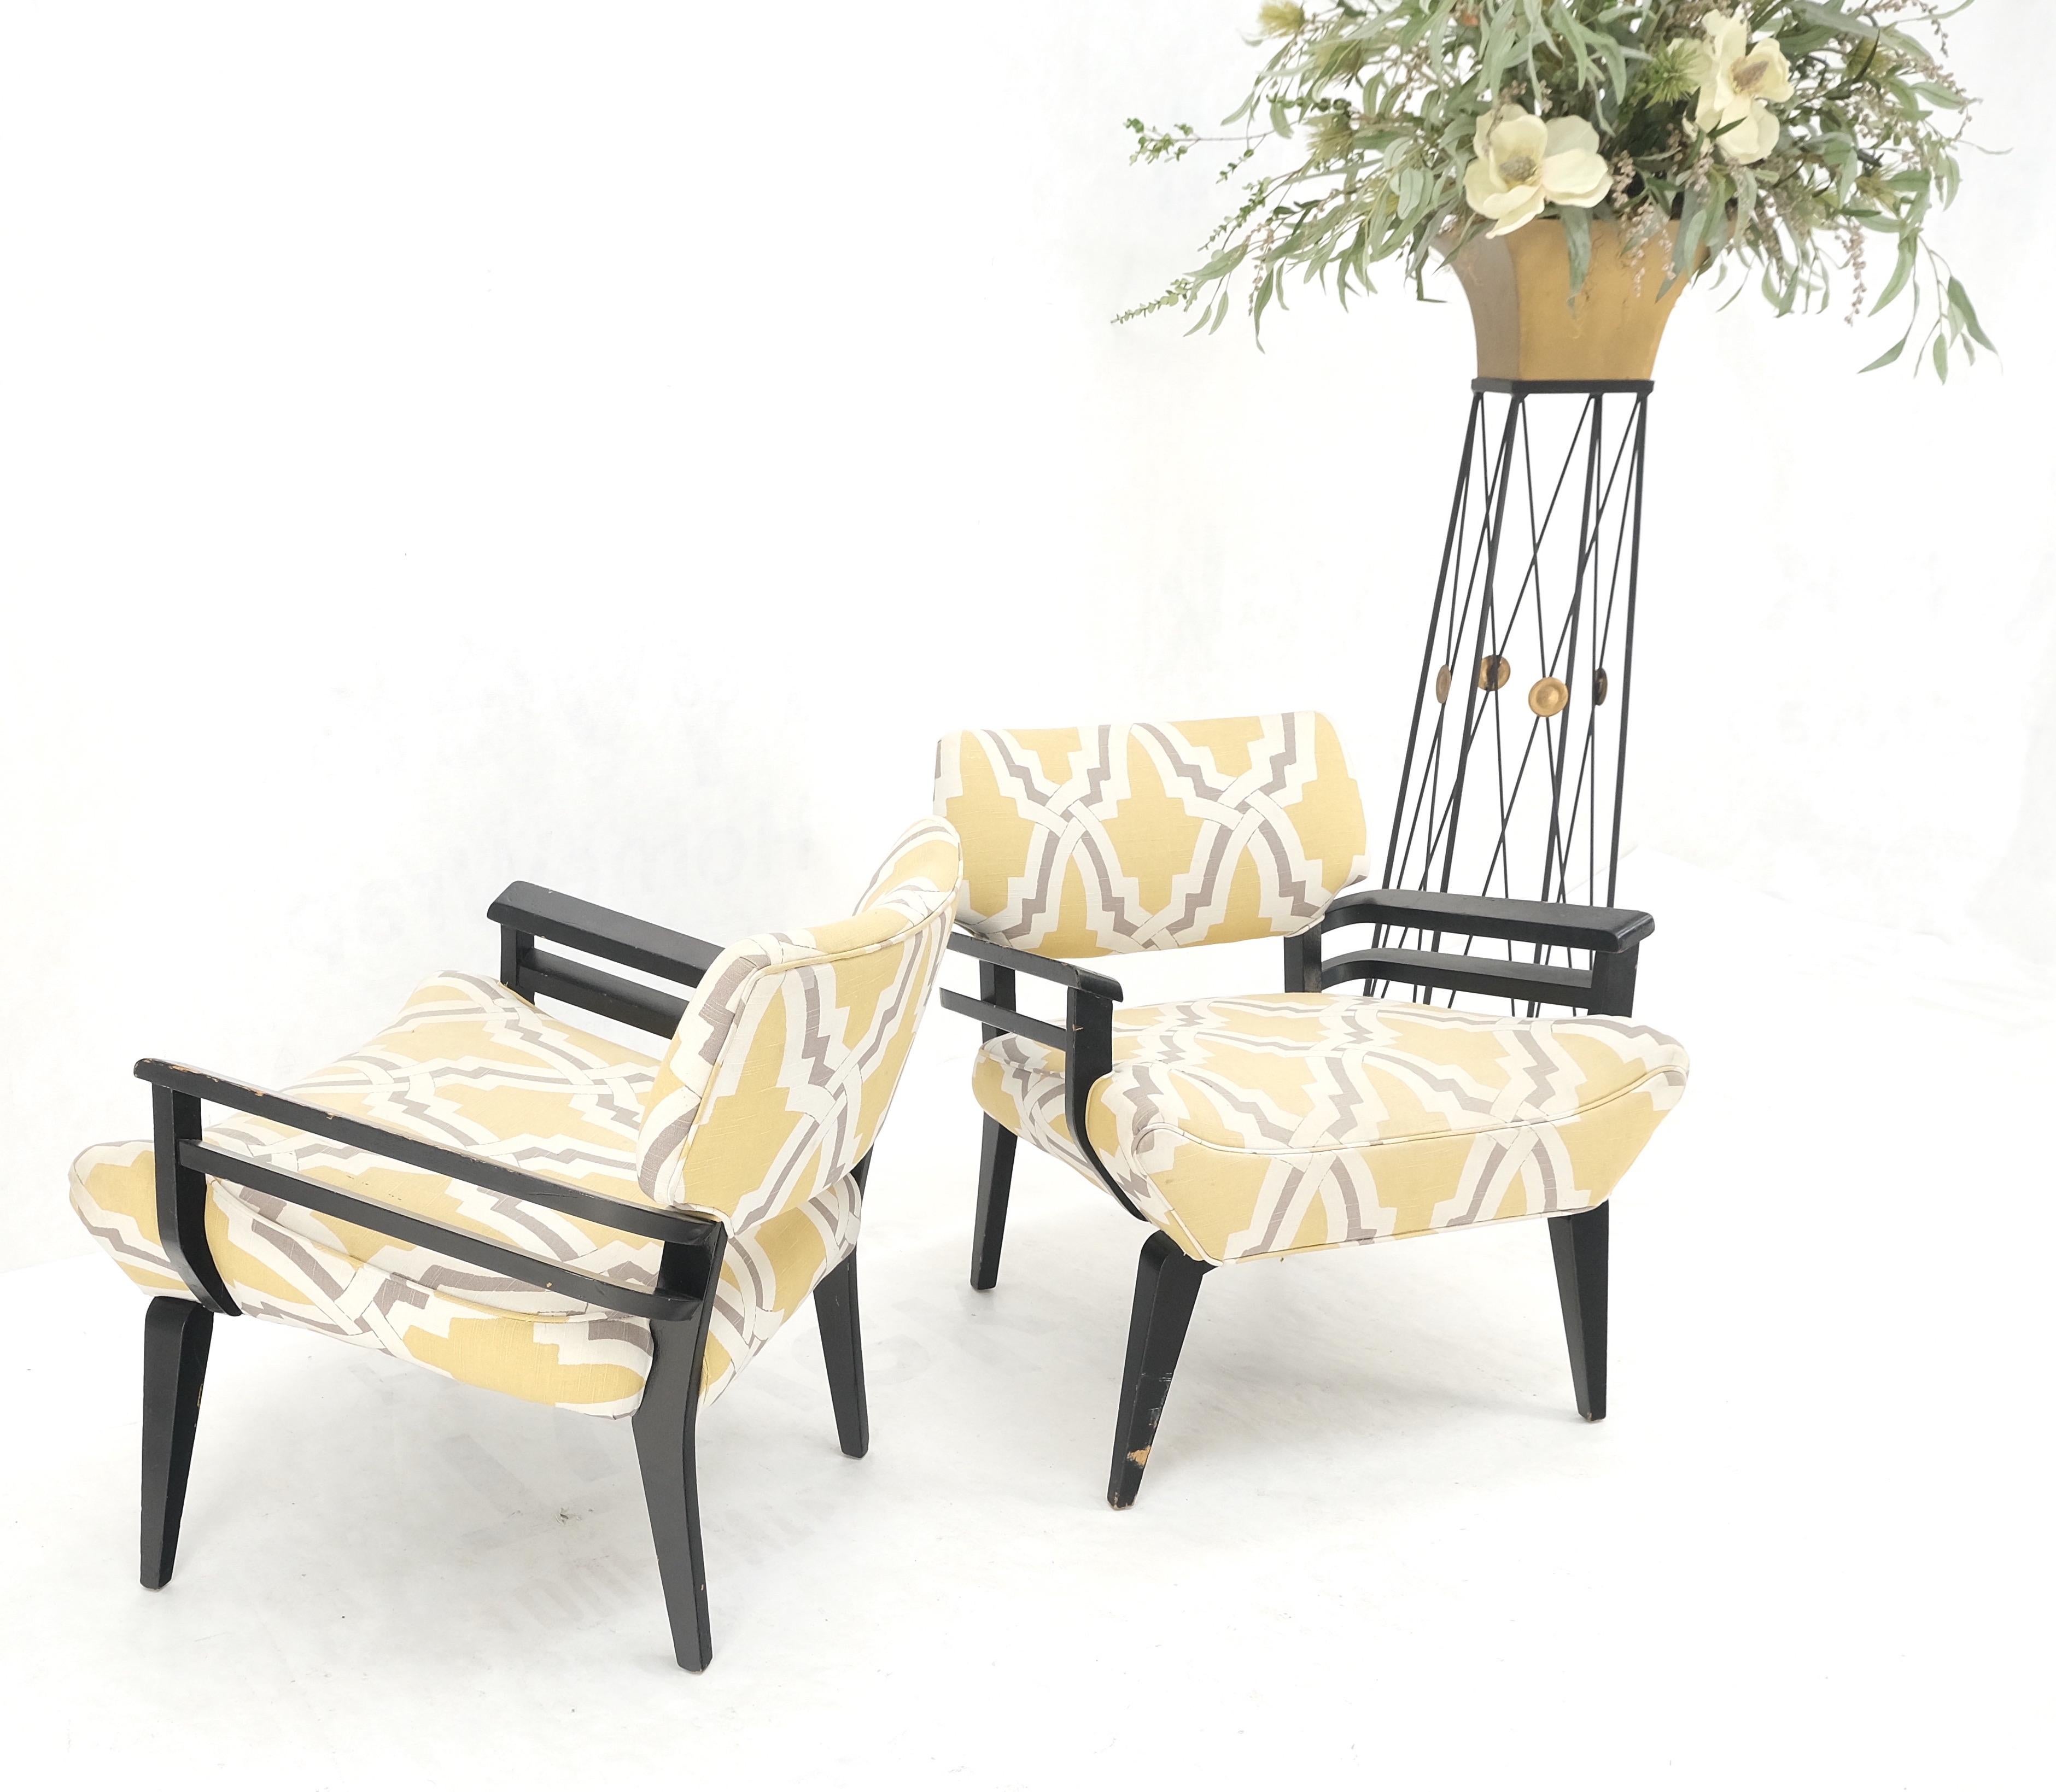 American Pair of Mid-Century Modern Black Lacquer Abstract Fabric Lounge Chairs AS IS For Sale